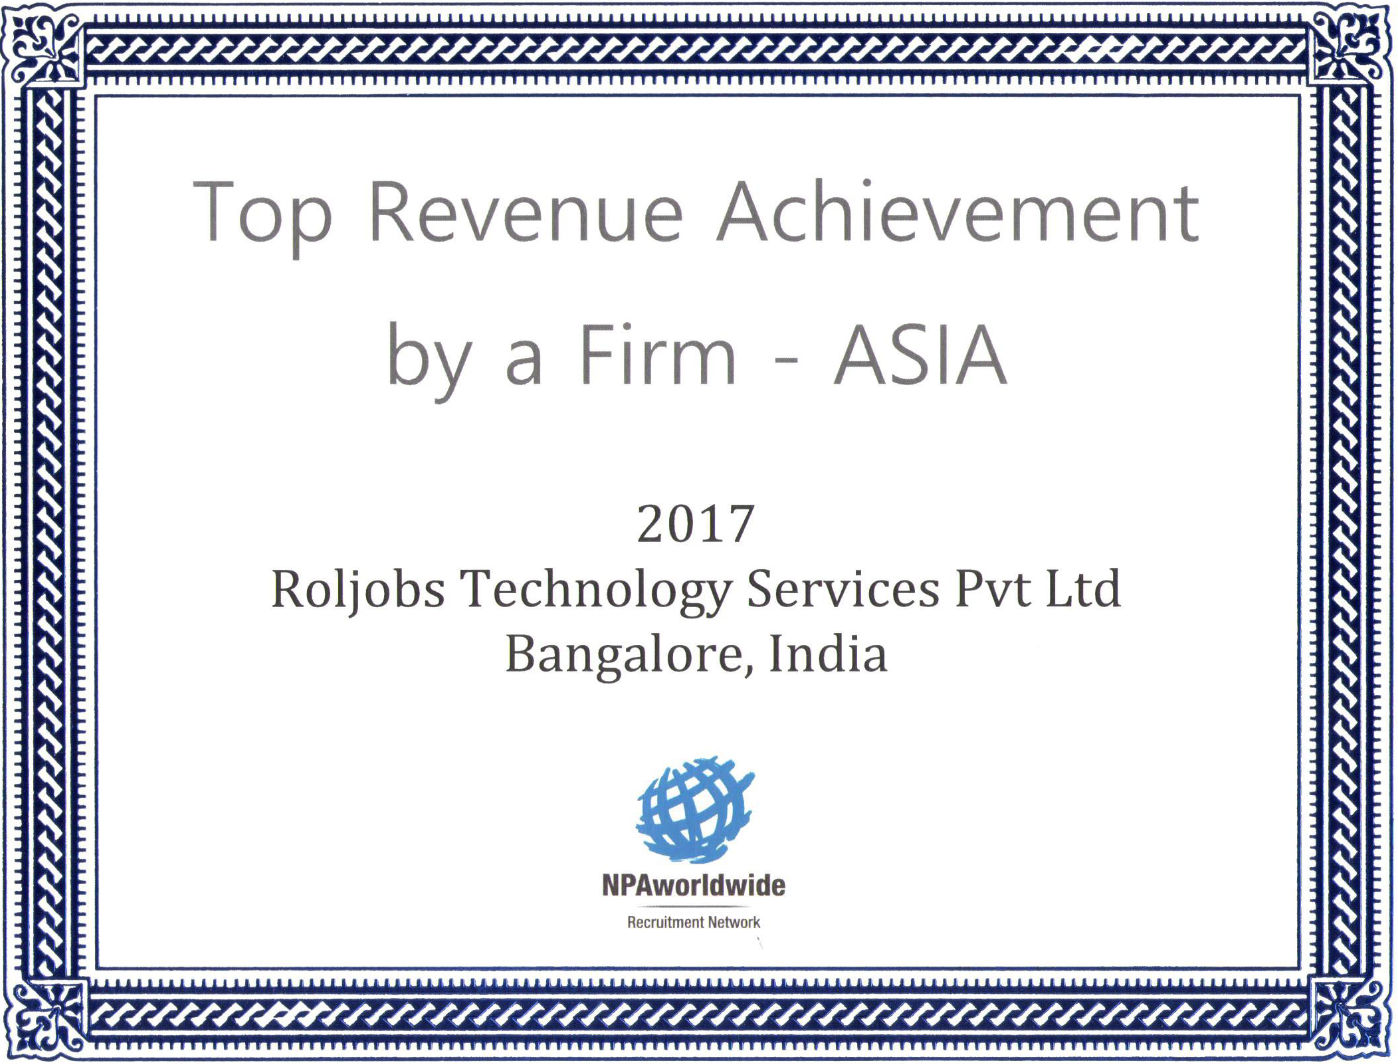 Top Revenue Achivement by a Firm - ASIA